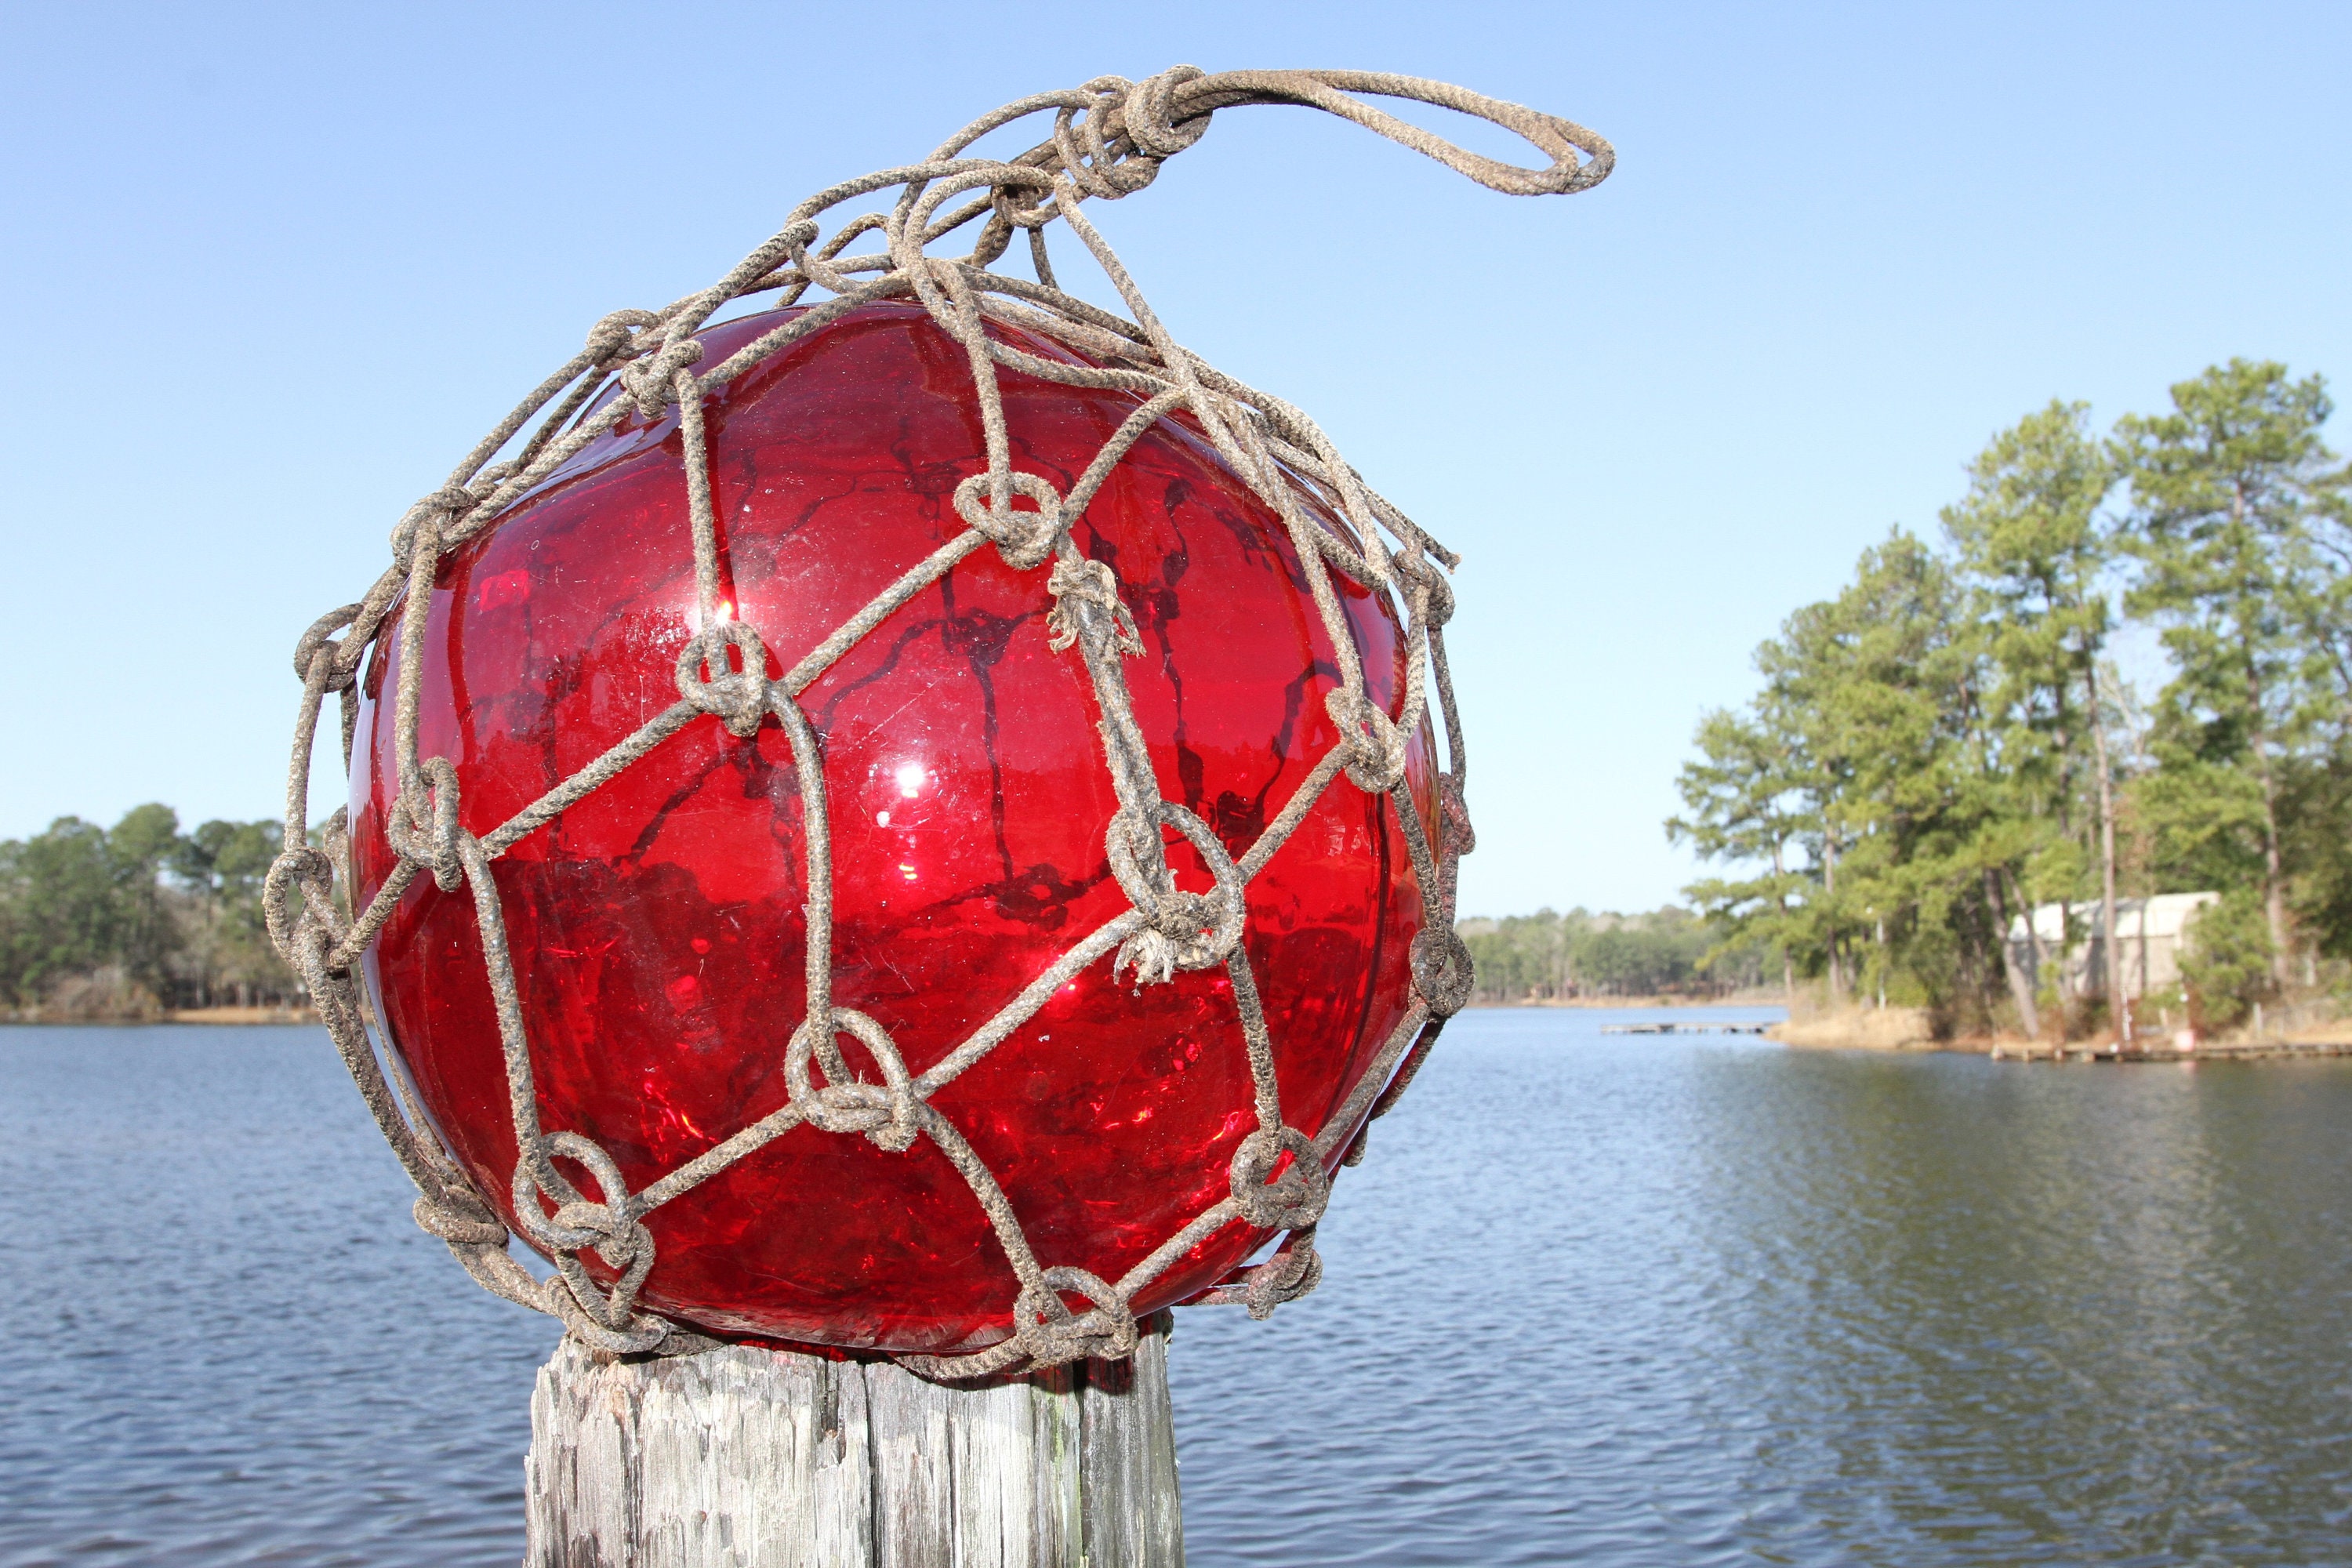 RED Netted Glass Fishing Float, Decorative Beach Decor Used